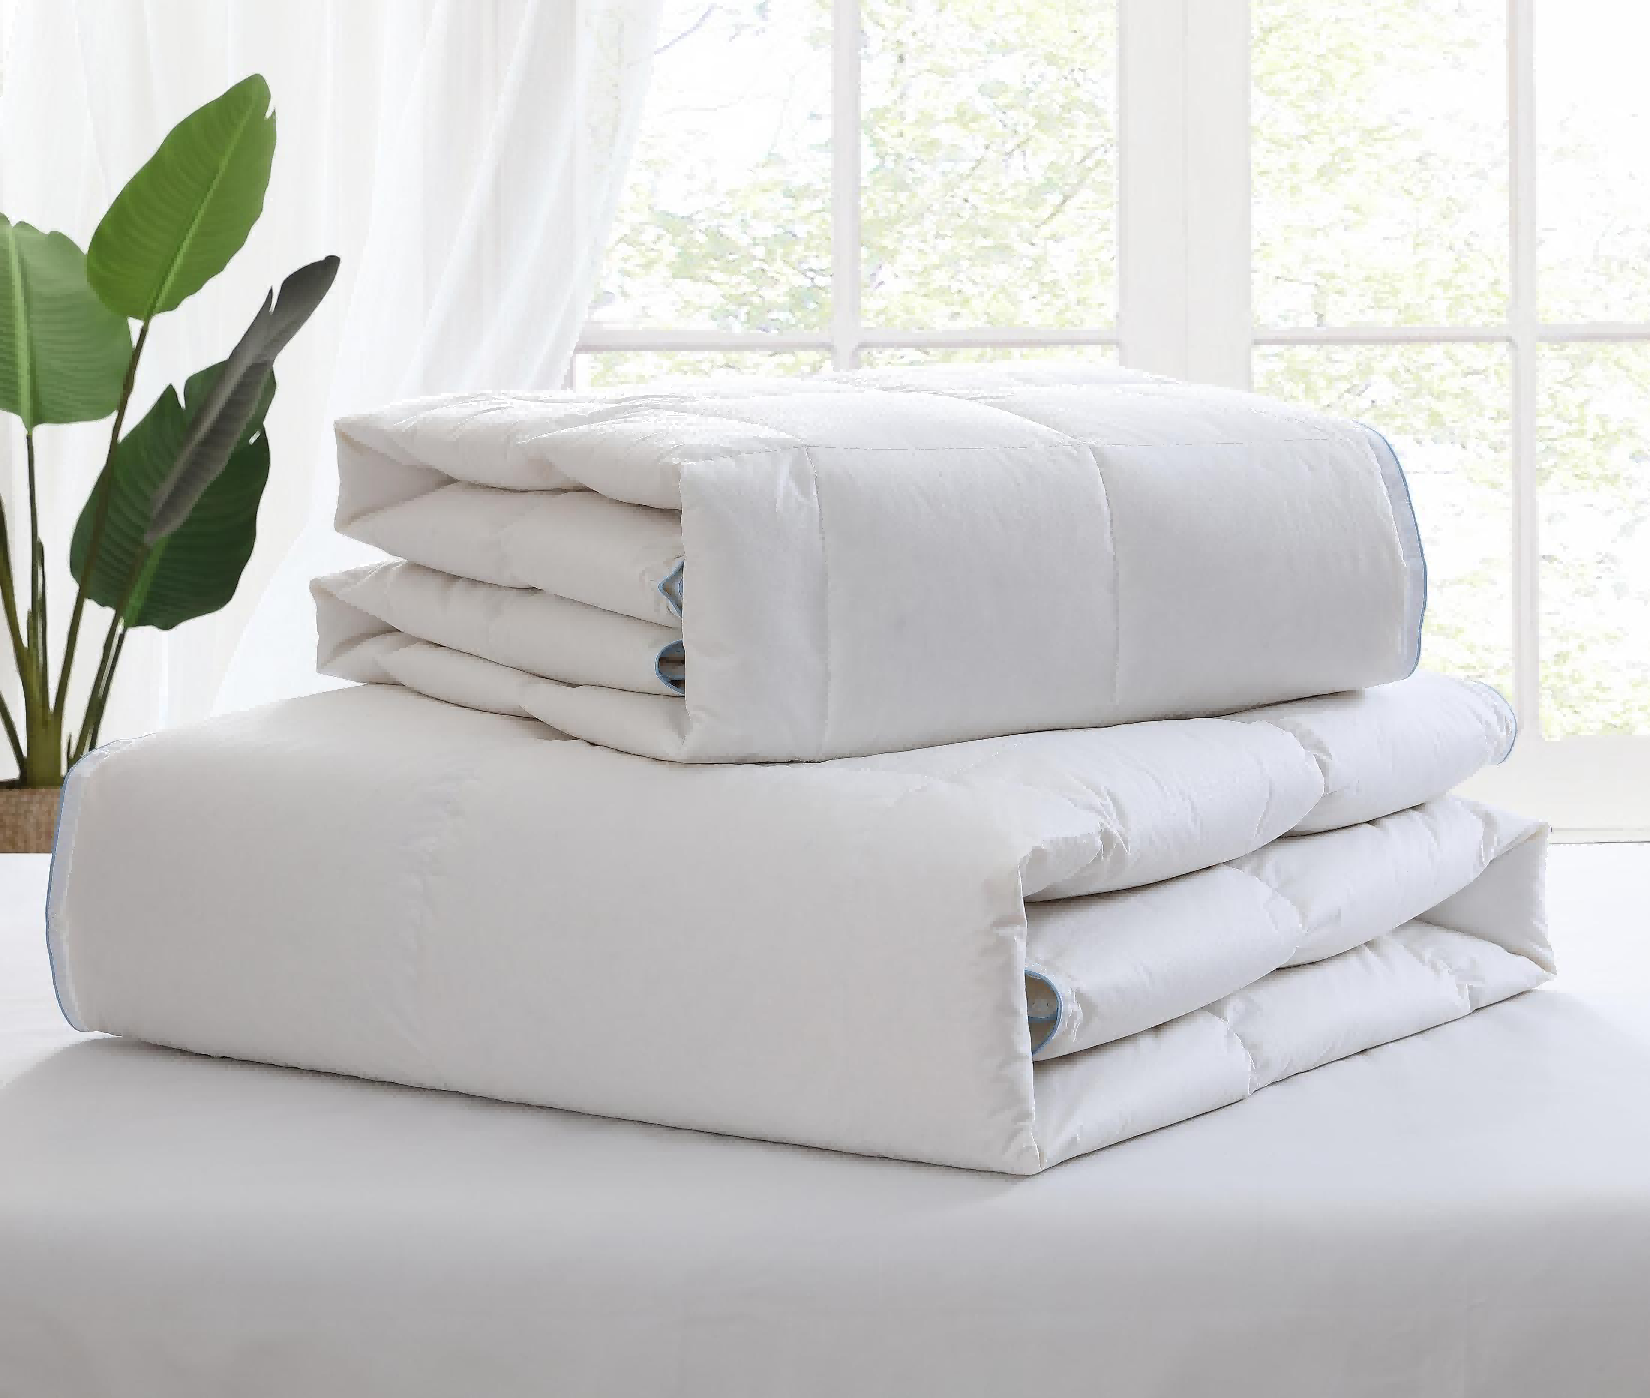 What is the four seasons duvet?